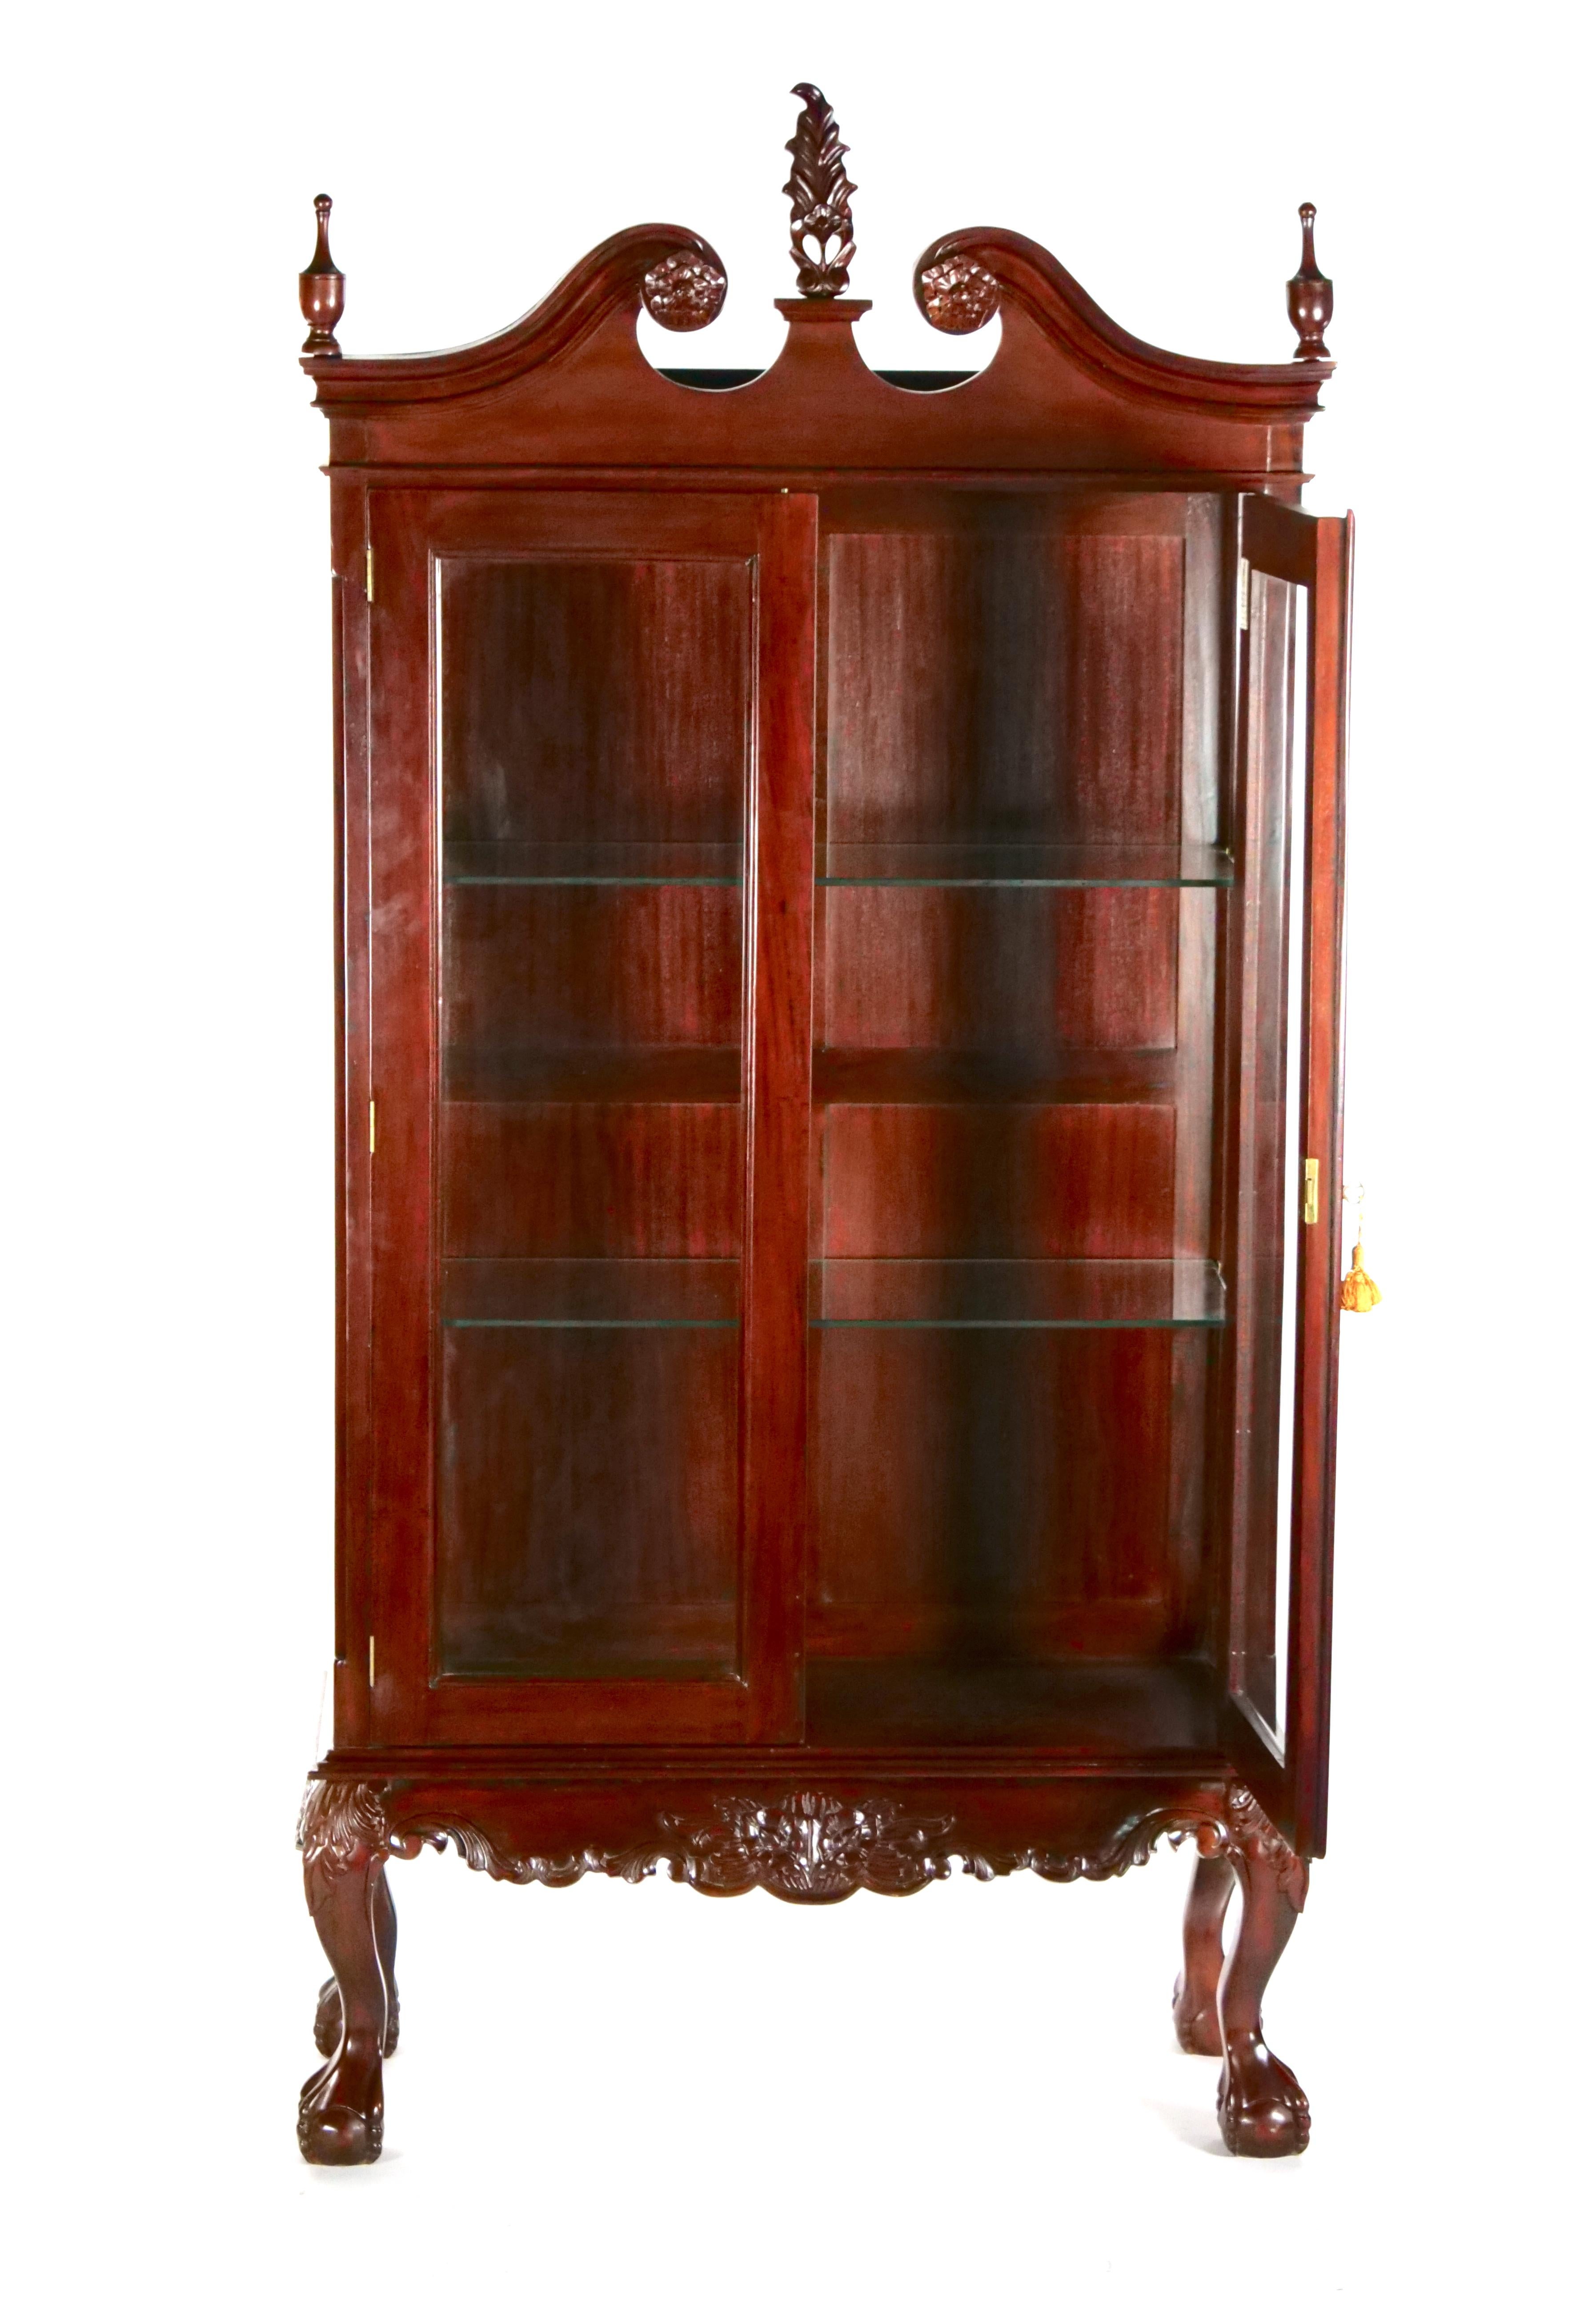 Early 20th century mahogany wood frame and glass display cabinet with two adjustable glass shelves. The cabinet features two front glass door with two interior removable glass shelve resting on four ball claw feet and three top finials. The cabinet